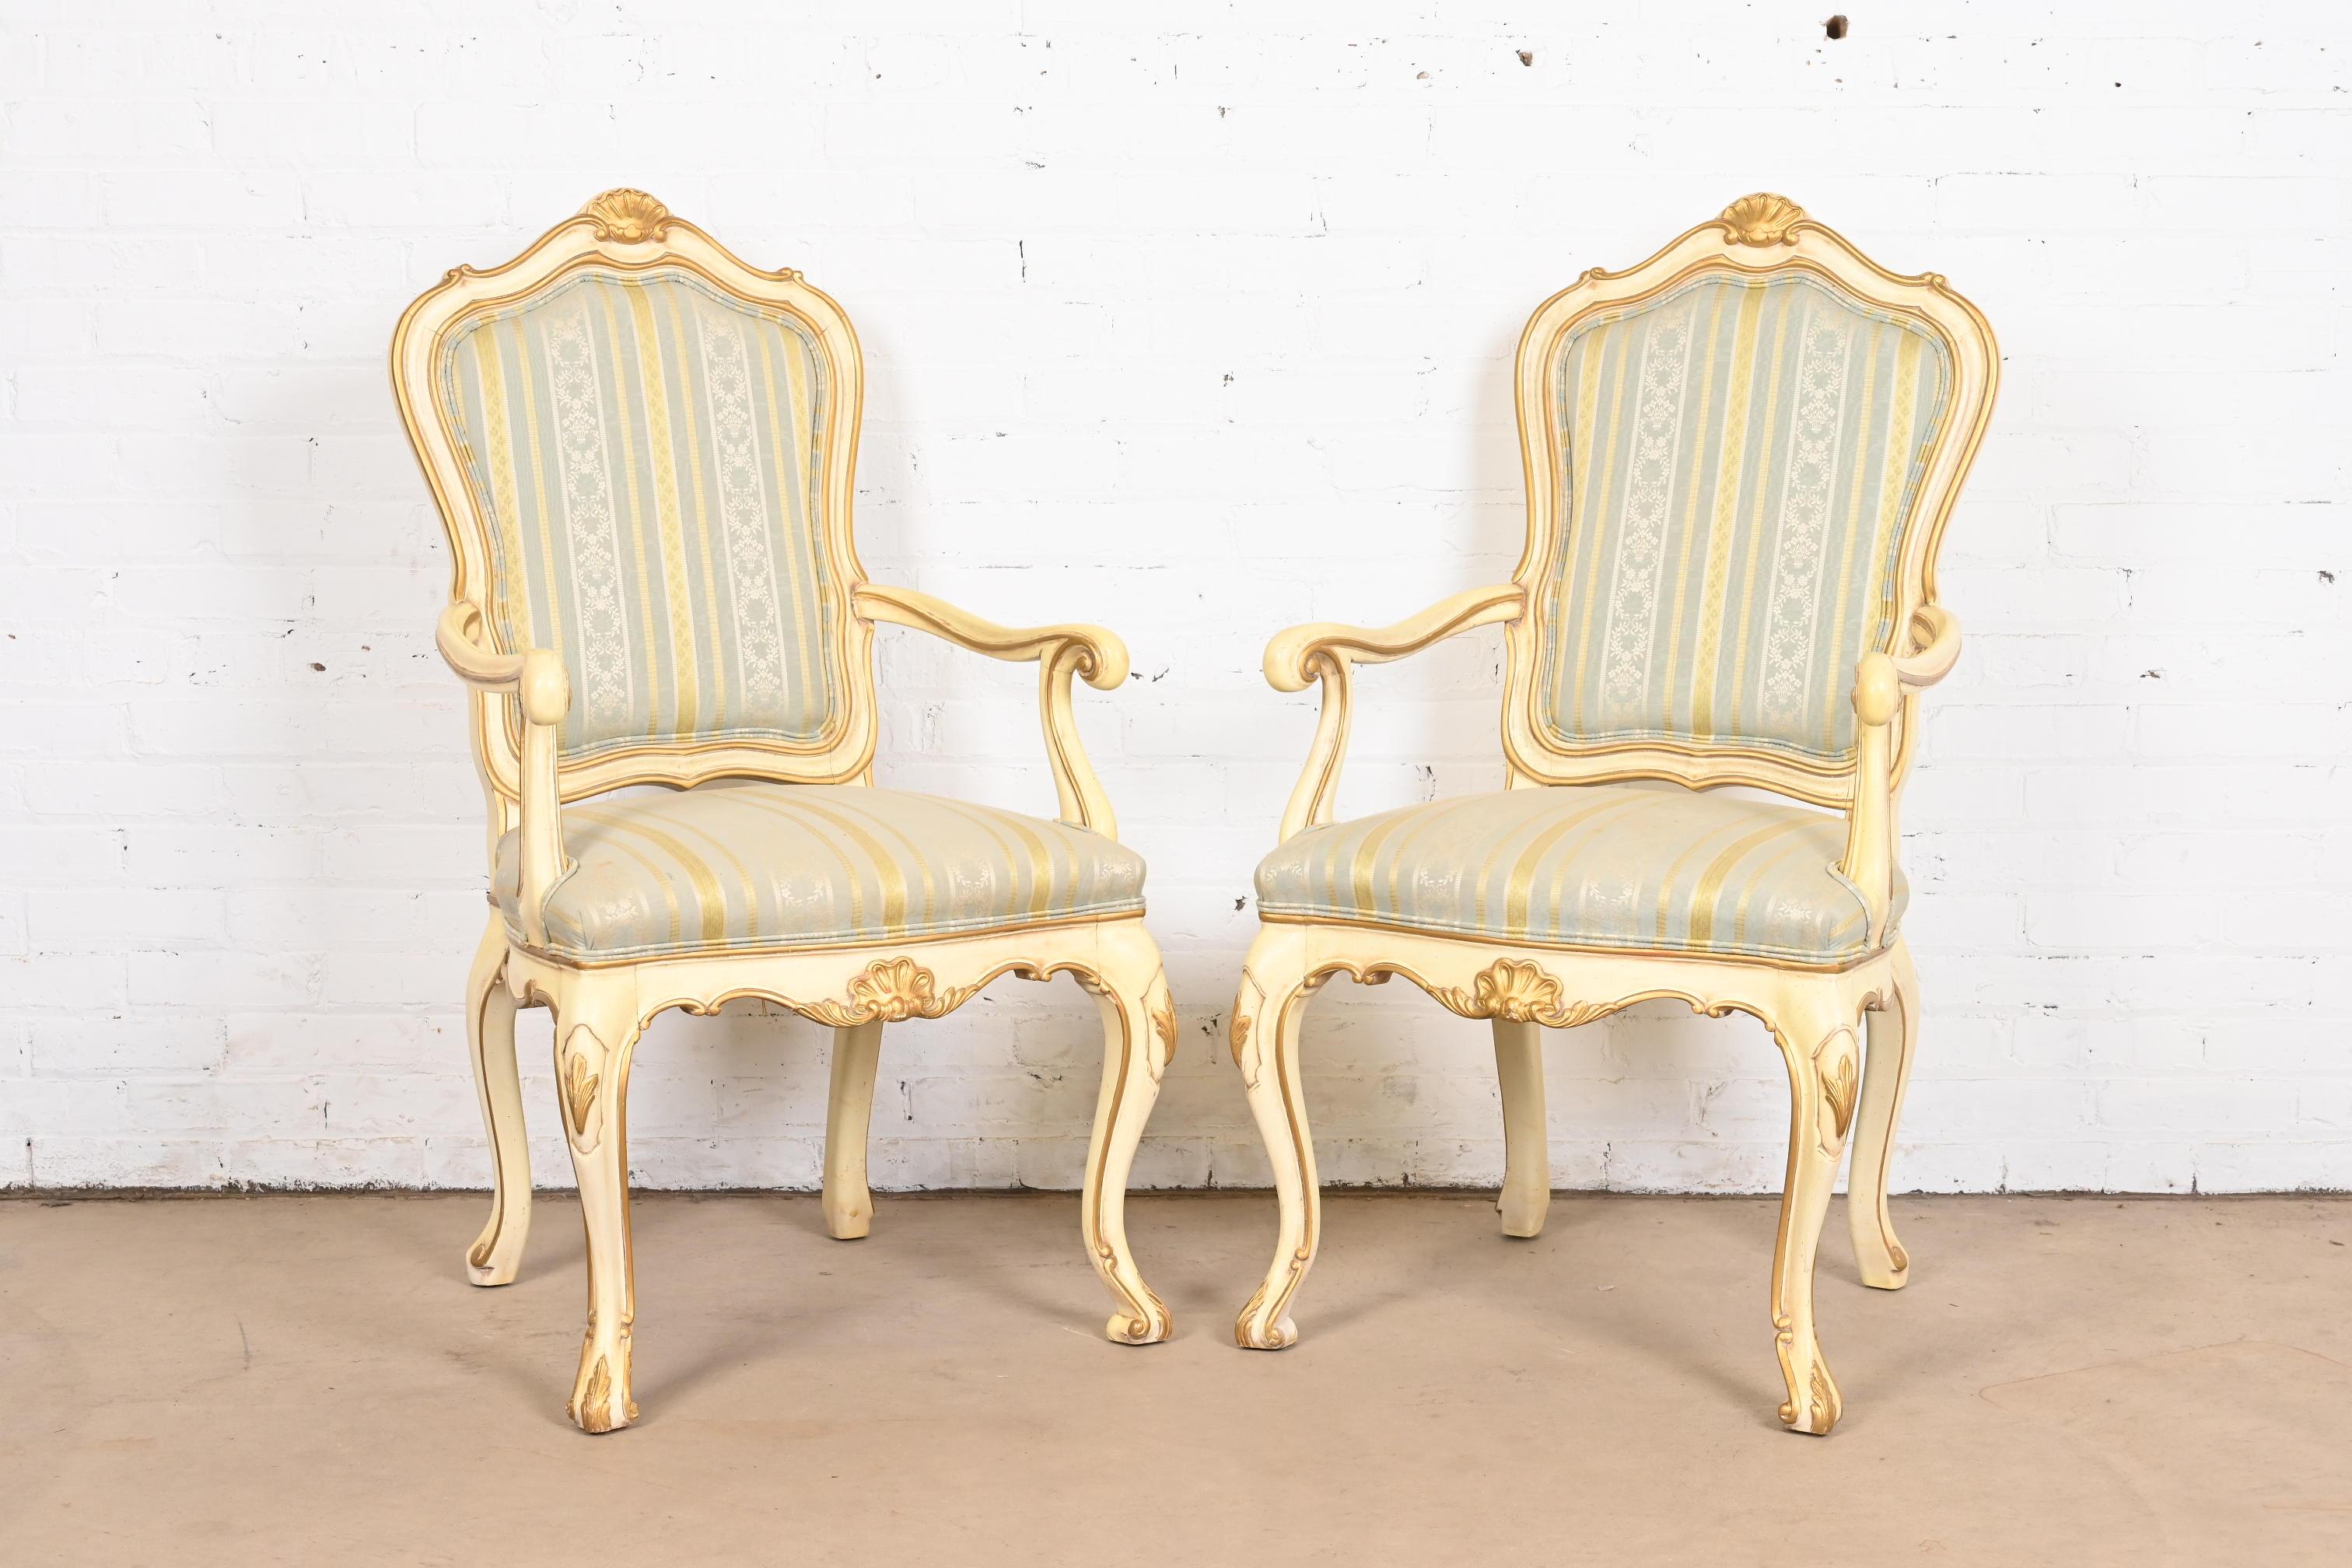 An outstanding pair of French Rococo Louis XV style fauteuils

By Karges Furniture

USA, Circa 1960s

Gorgeous cream lacquered carved solid walnut frames, with gold gilt details, and upholstered seats and backs.

Measures: 23.25